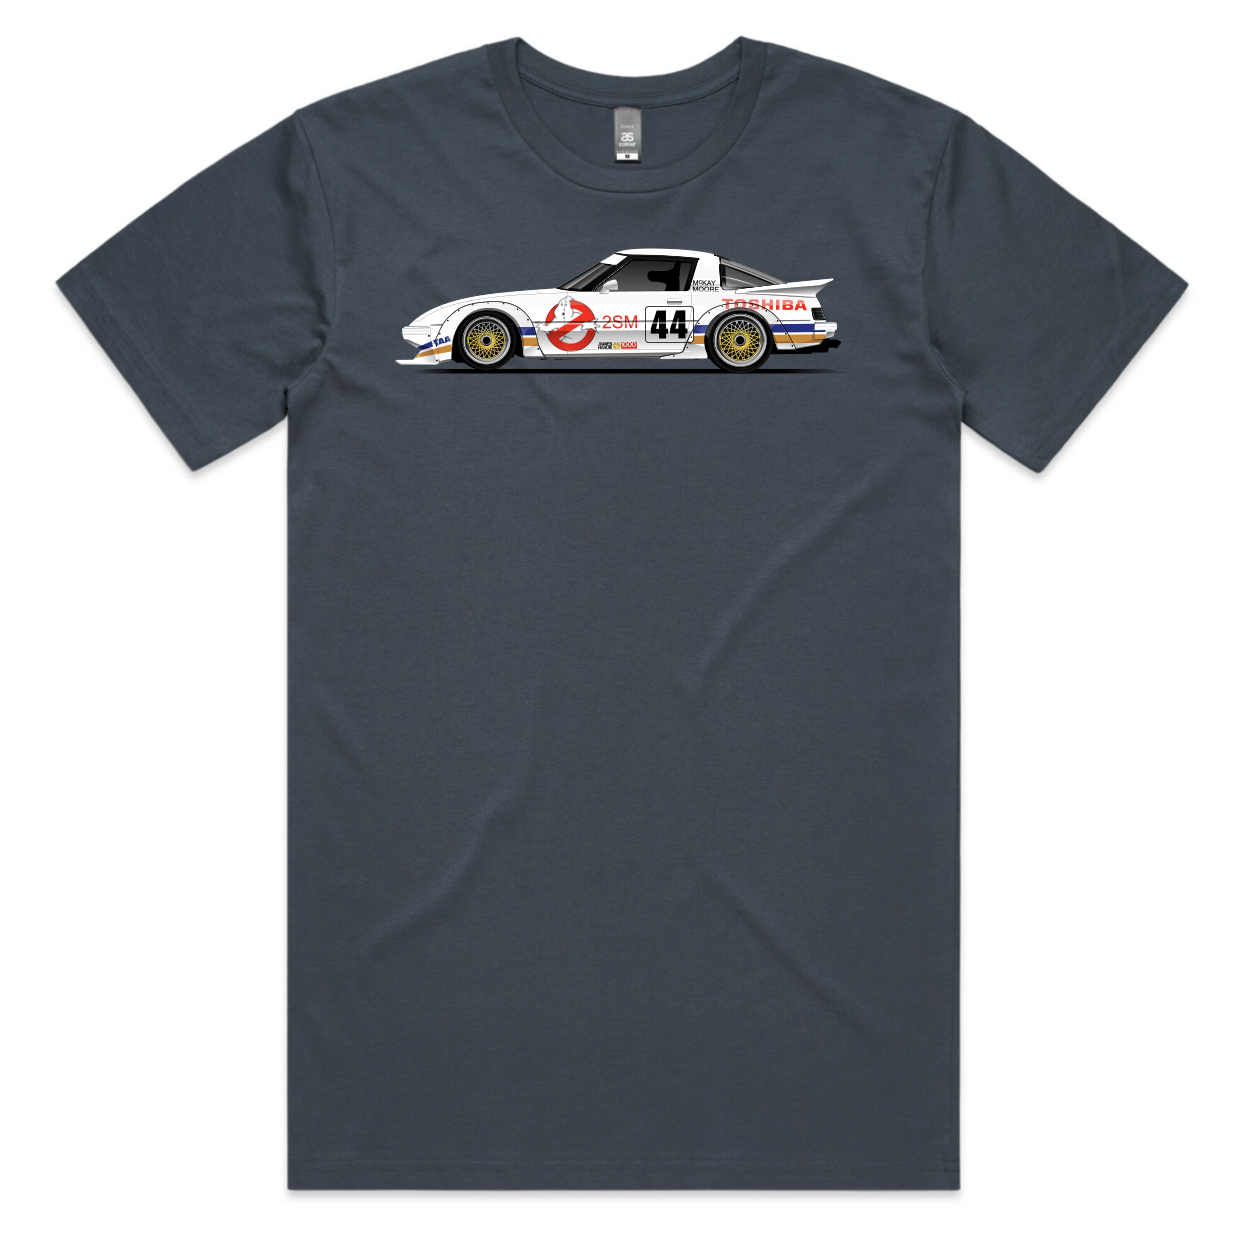 Ghost Busters RX7 Group C - Mens